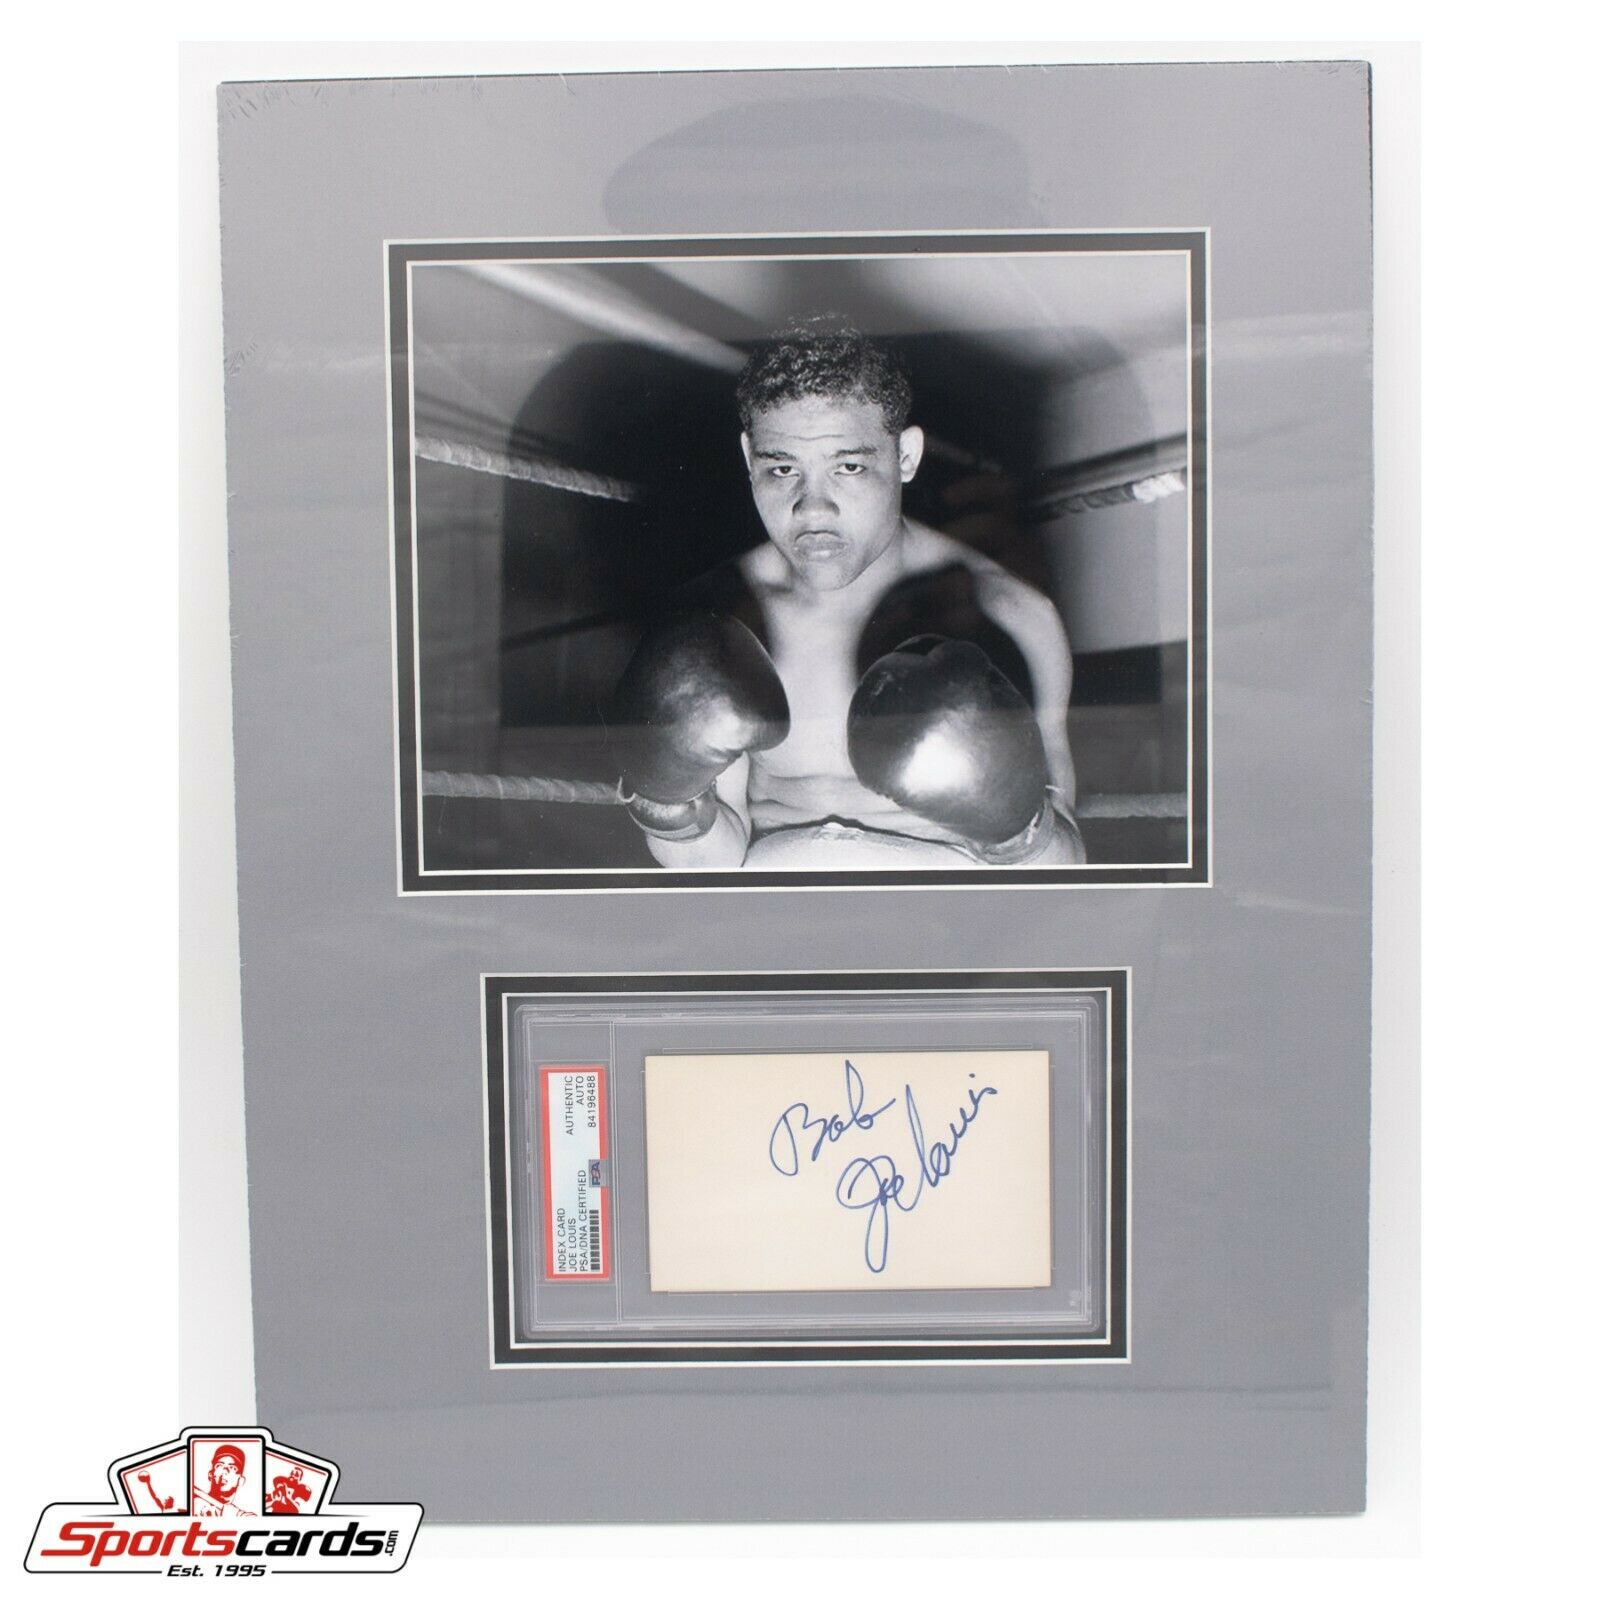 Joe Louis PSA/DNA Signed 3x5 Index Card Matted w/ 8x10 Photo 14x18 overall